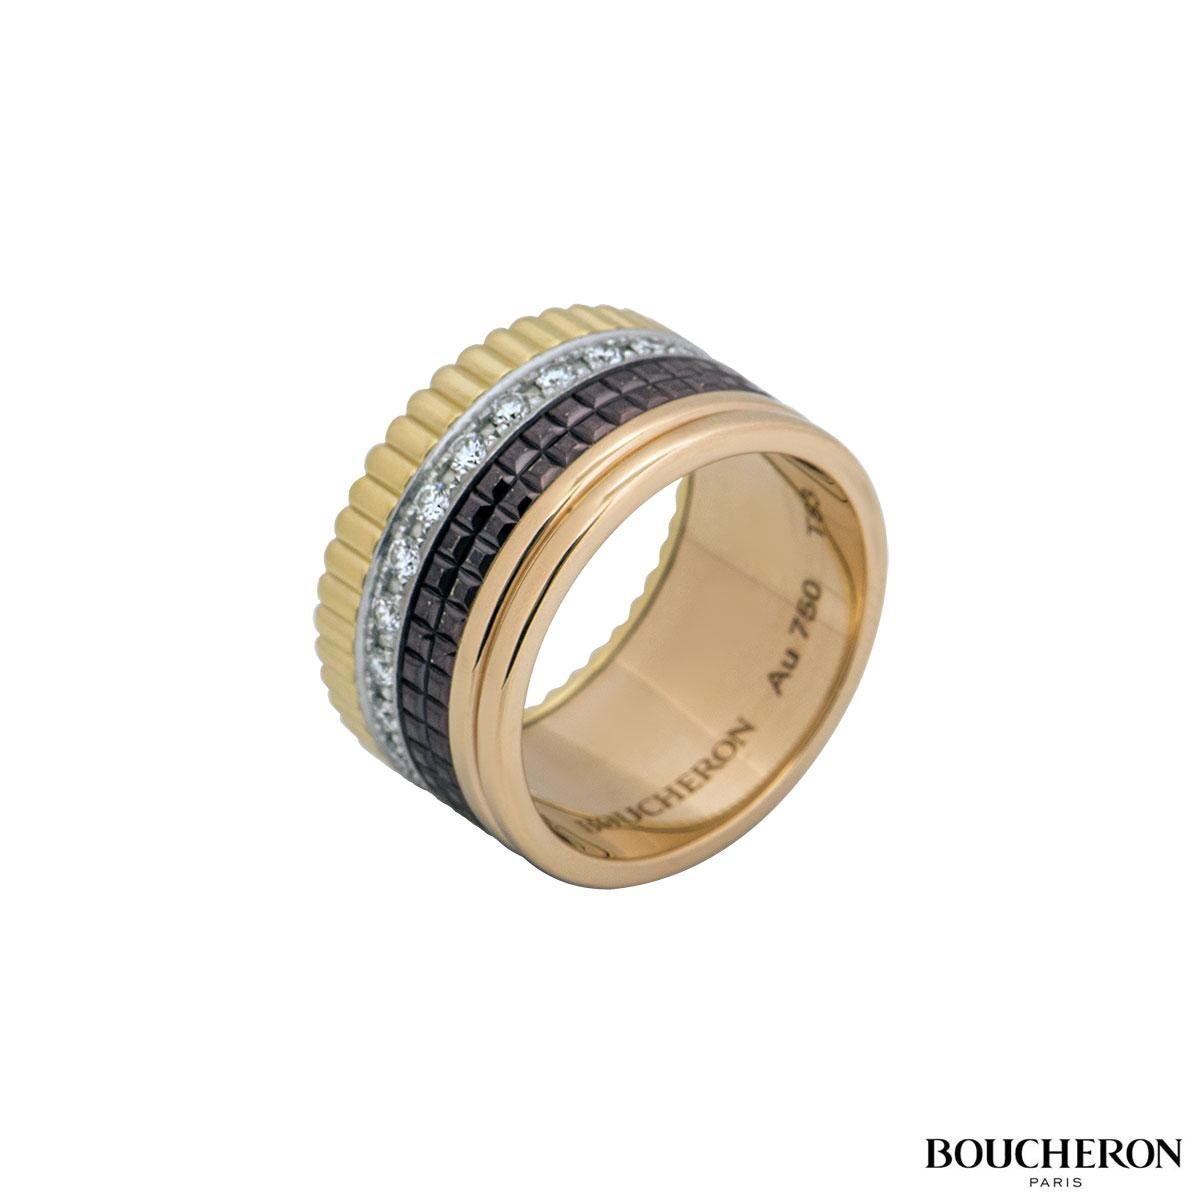 A Large 18k tri-colour diamond and PVD coated ring by Boucheron from the Quatre Classique collection. The ring comprises of four bands that are made up of a double band in rose gold, a double row of brown PVD in a square block design, a single row